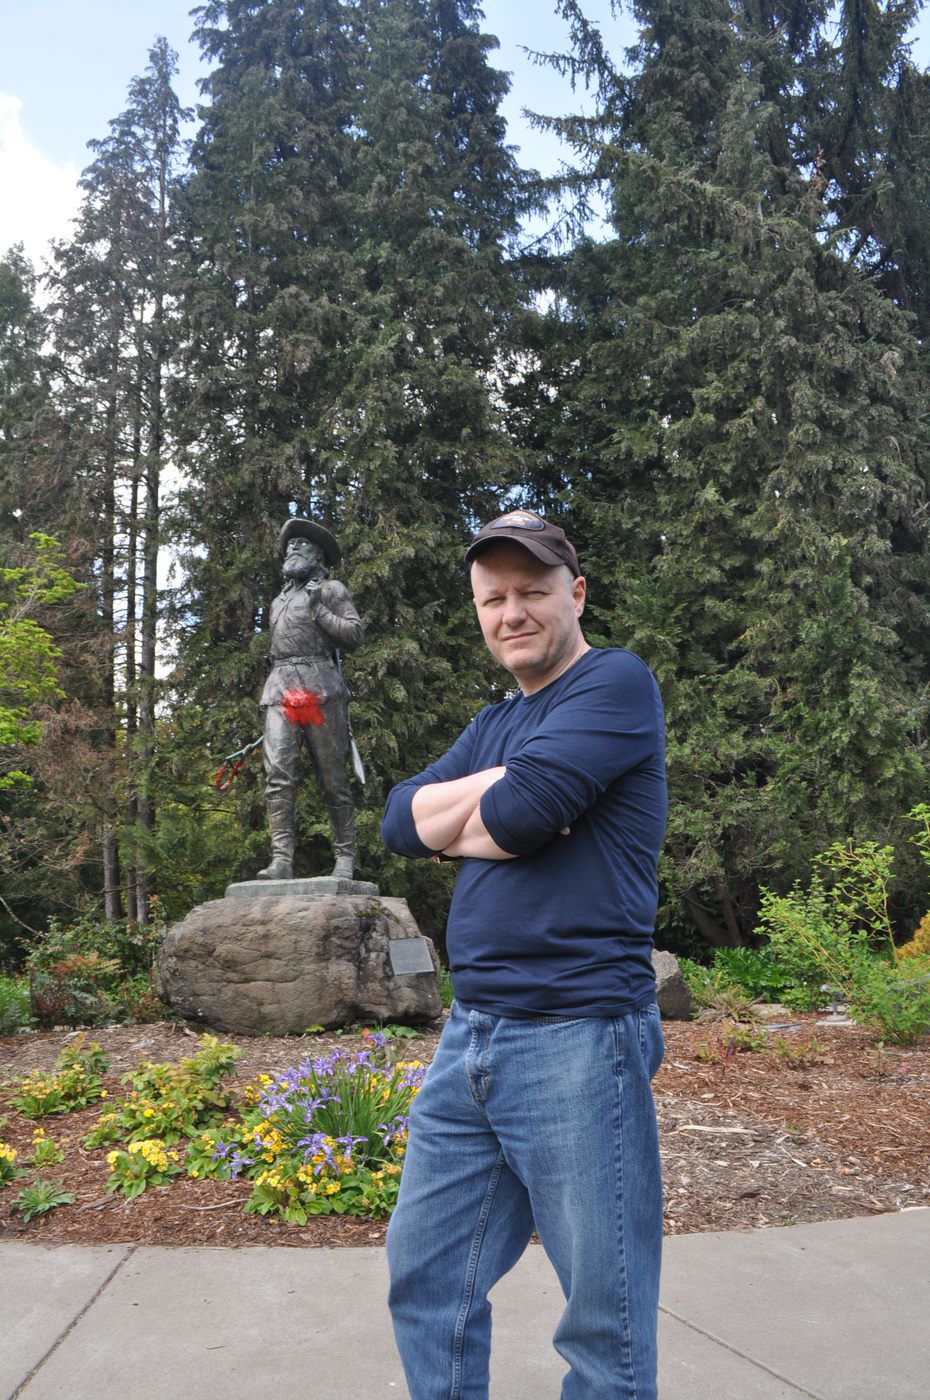 Stomper statue has CSUEB connections – The Pioneer